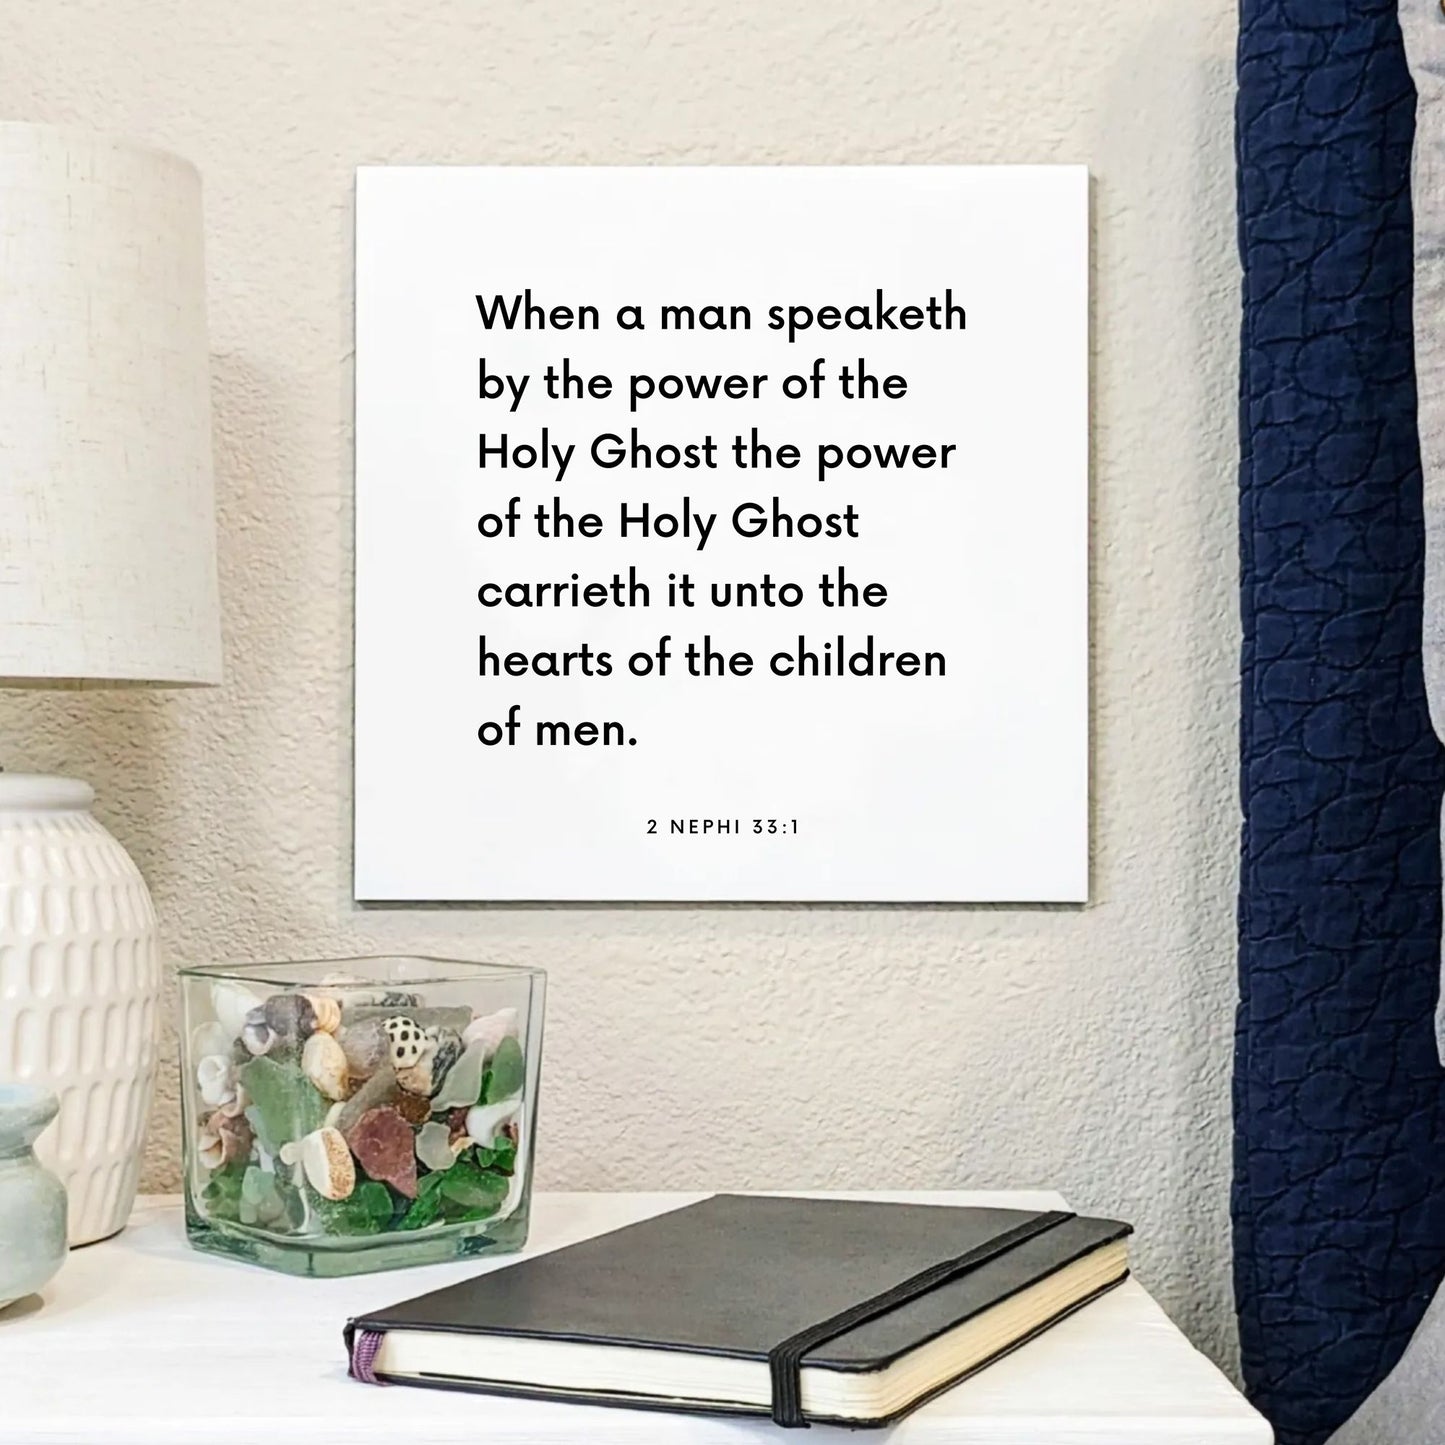 Bedside mouting of the scripture tile for 2 Nephi 33:1 - "When a man speaketh by the power of the Holy Ghost"